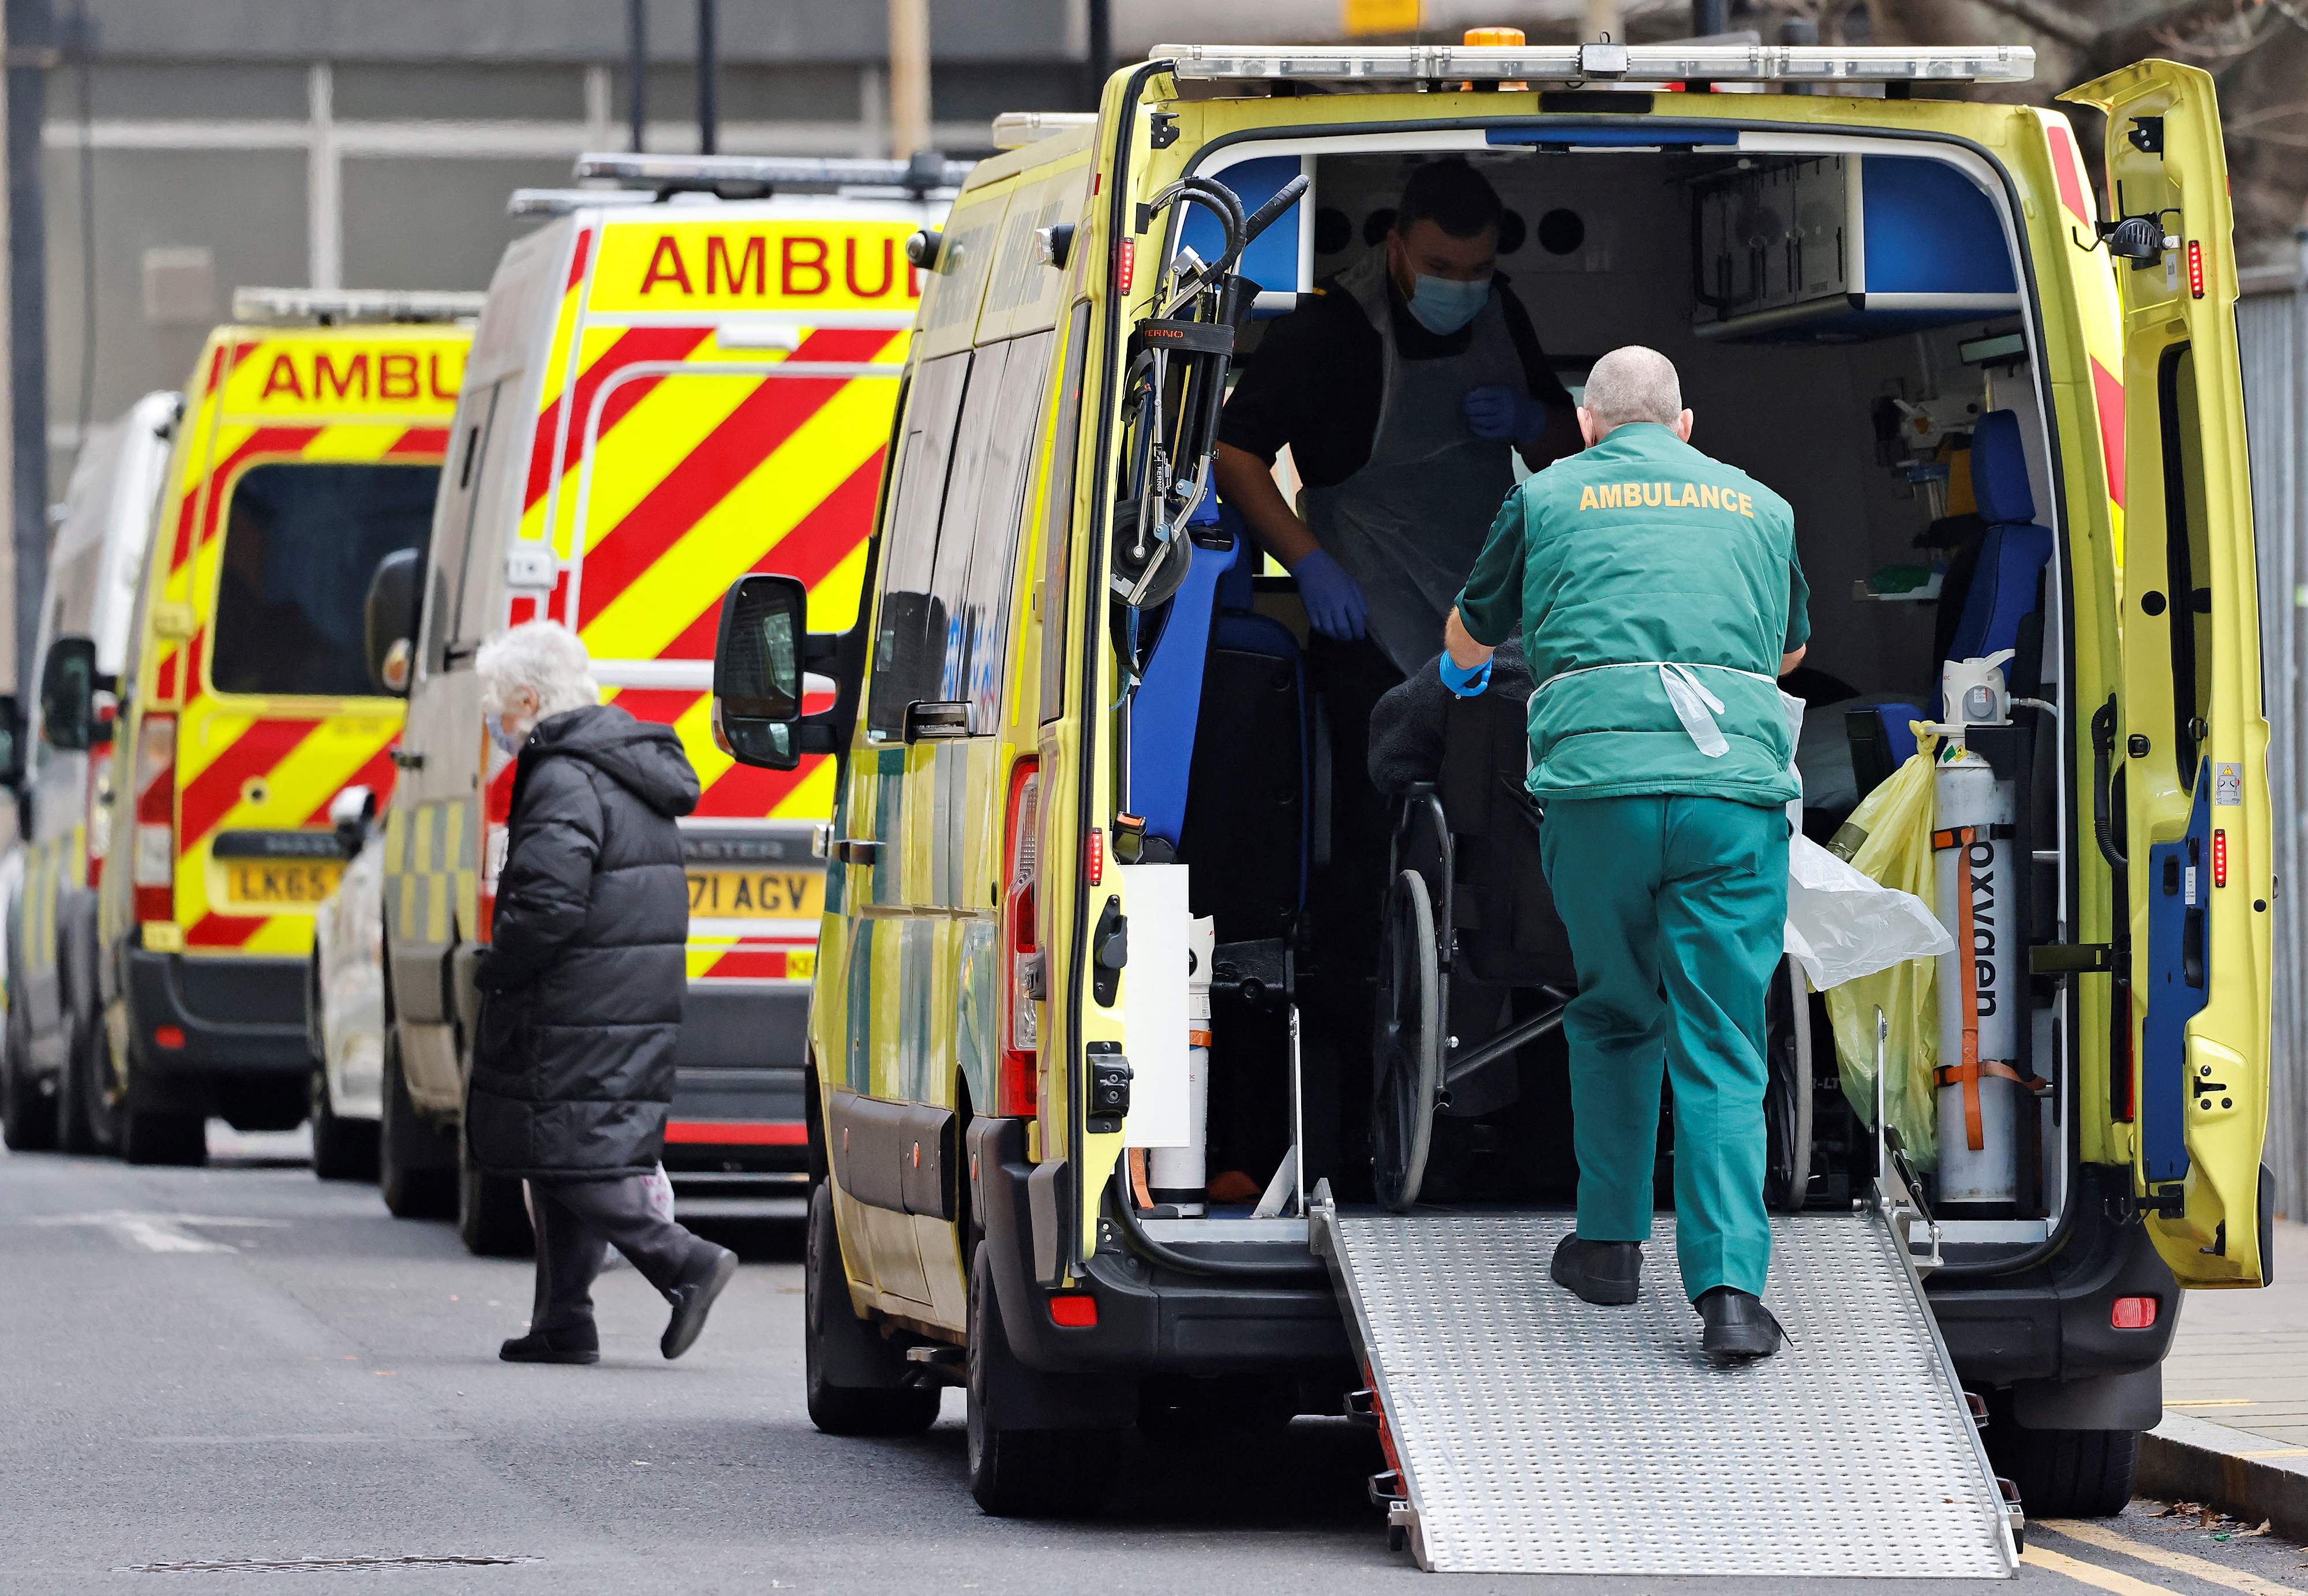 Midlands hospitals asked to plan for ‘mass casualty’ scenario